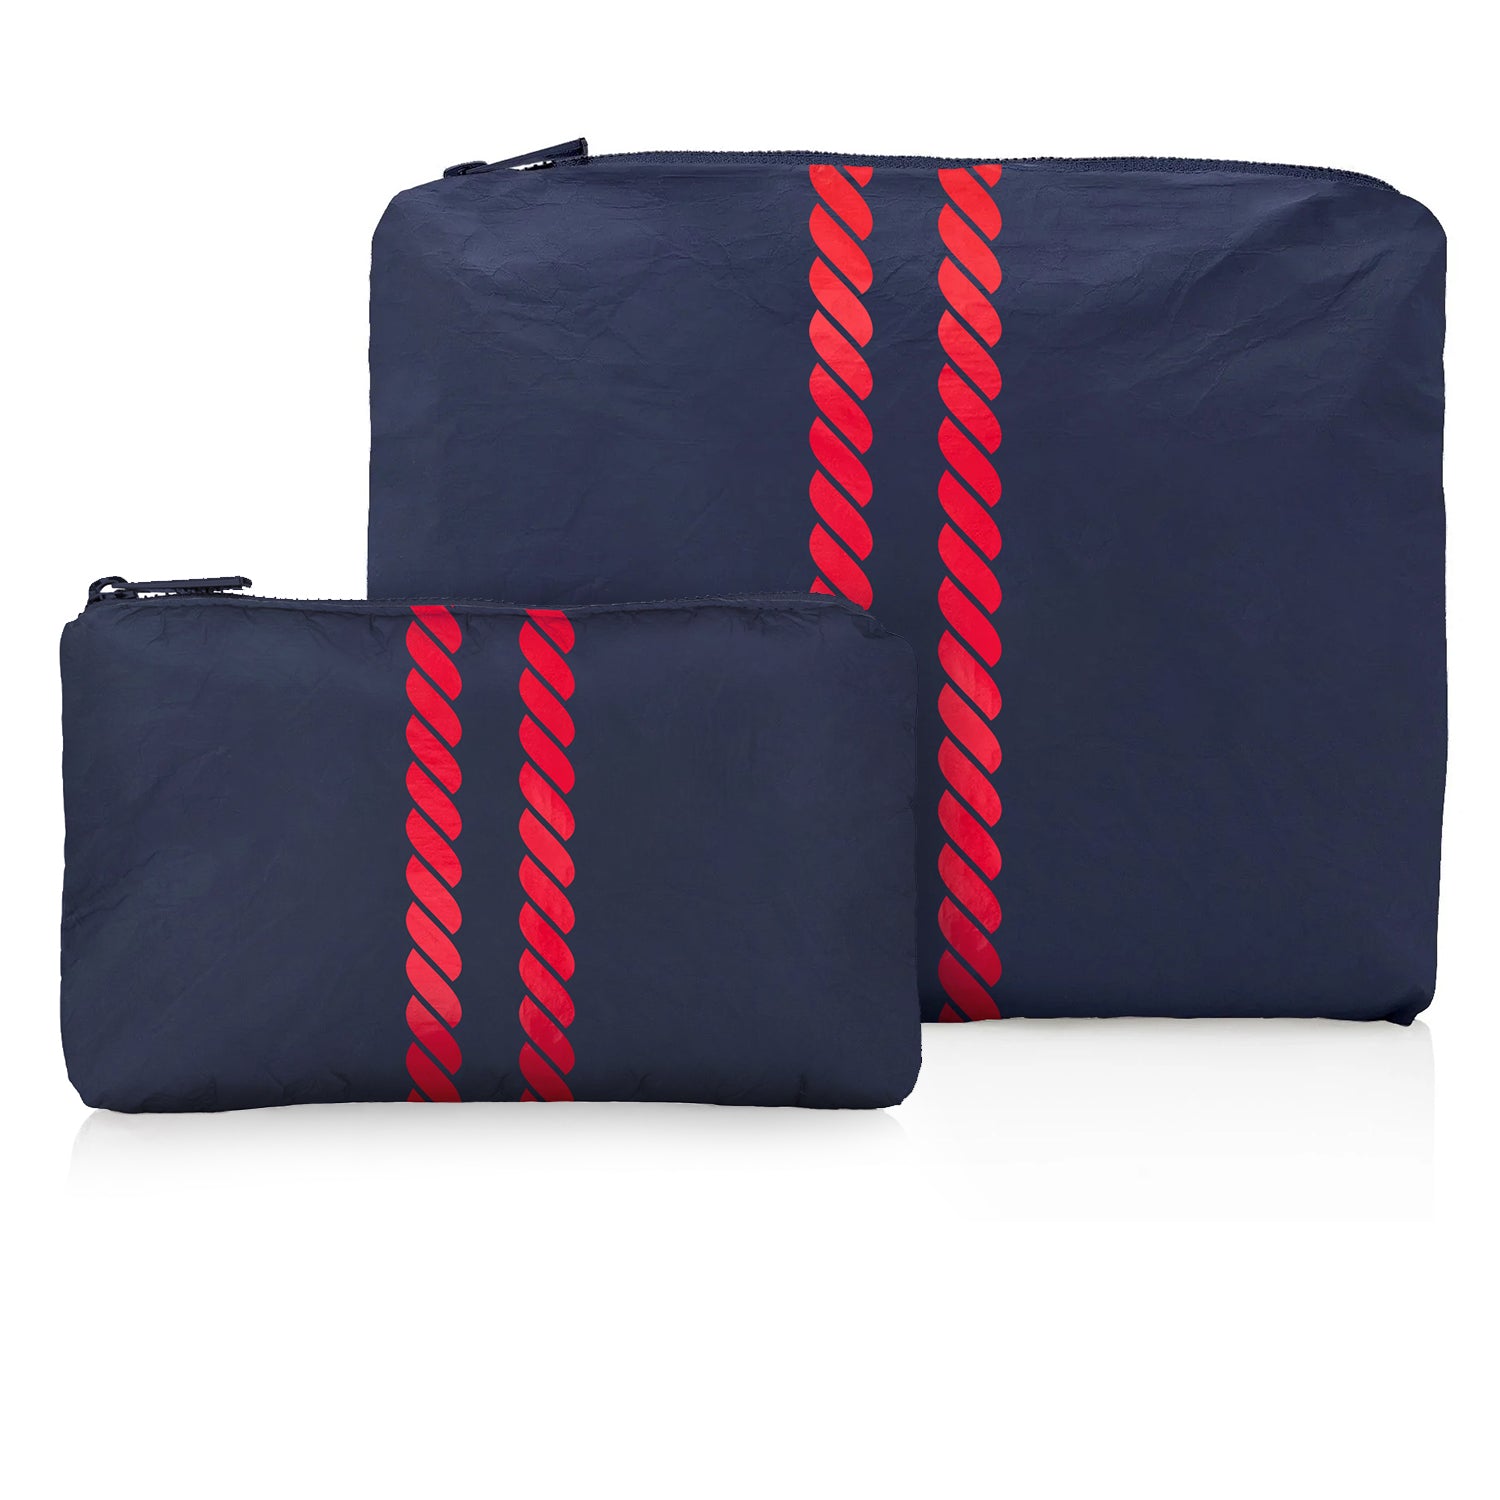 navy blue zipper pack set the nautical red stripes